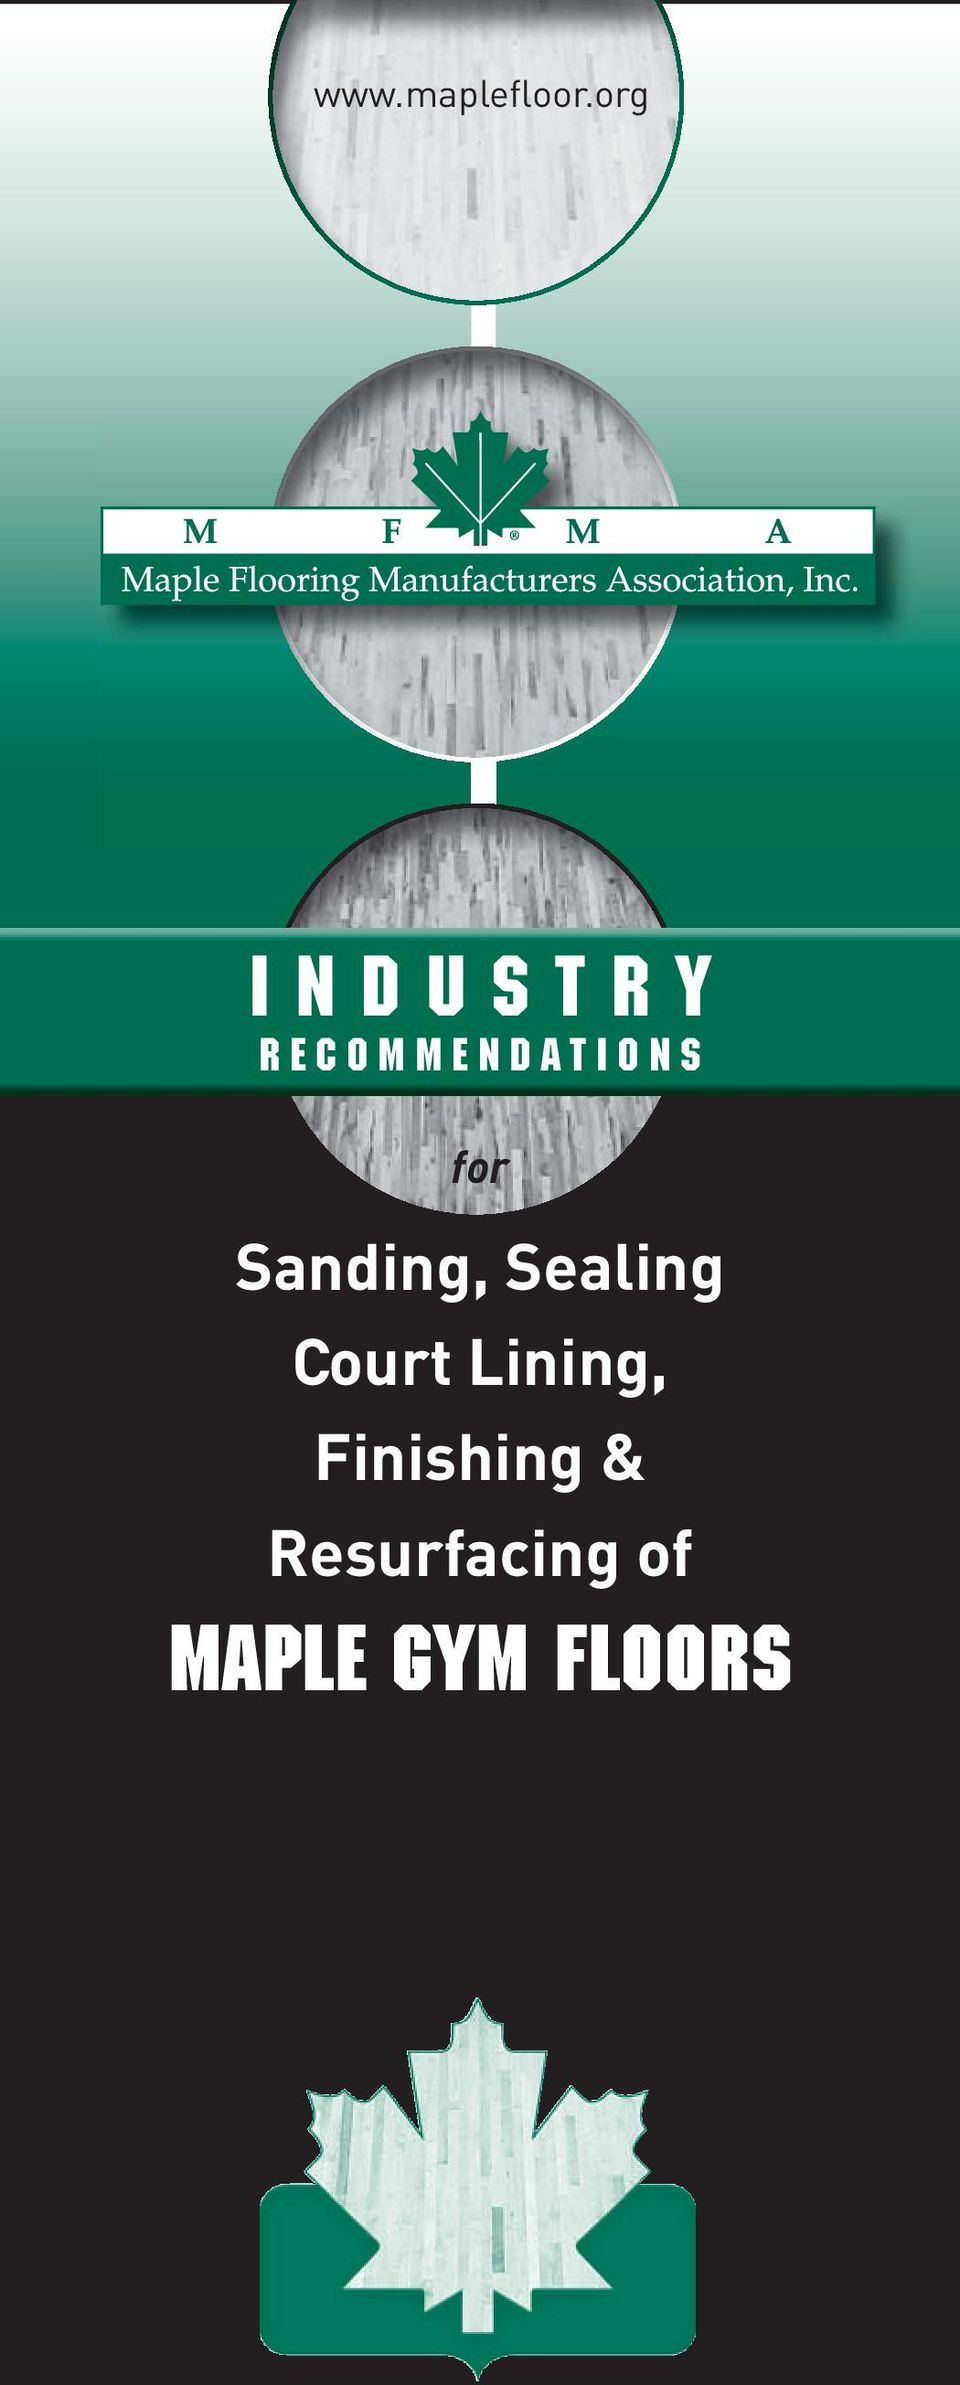 26 Perfect Hardwood Floor Refinishing Colorado Springs Co 2024 free download hardwood floor refinishing colorado springs co of industry recommendations for sanding sealing court lining with regard to for sanding sealing court lining